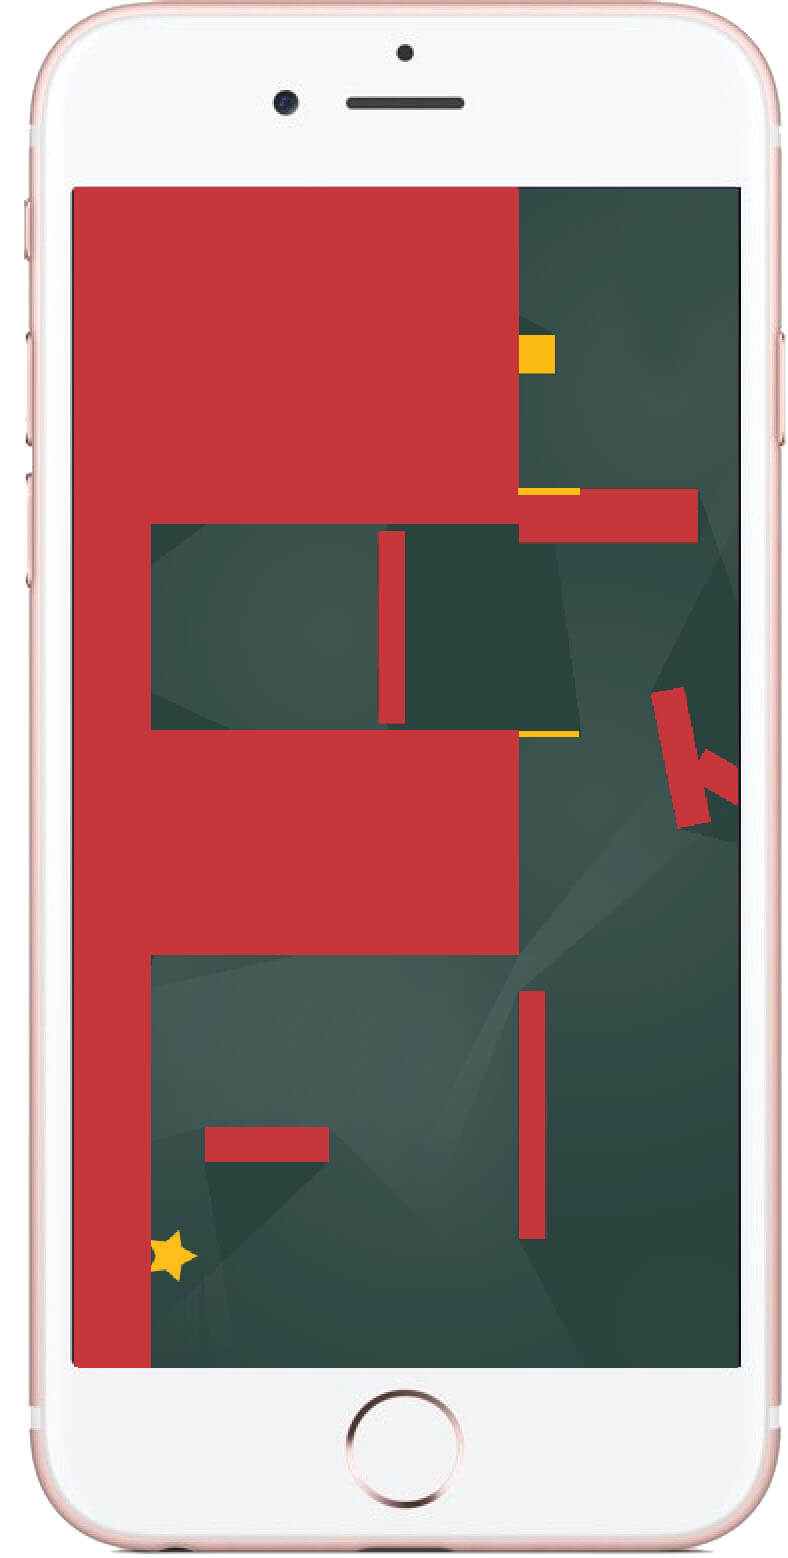 Risky room game for iOS  android